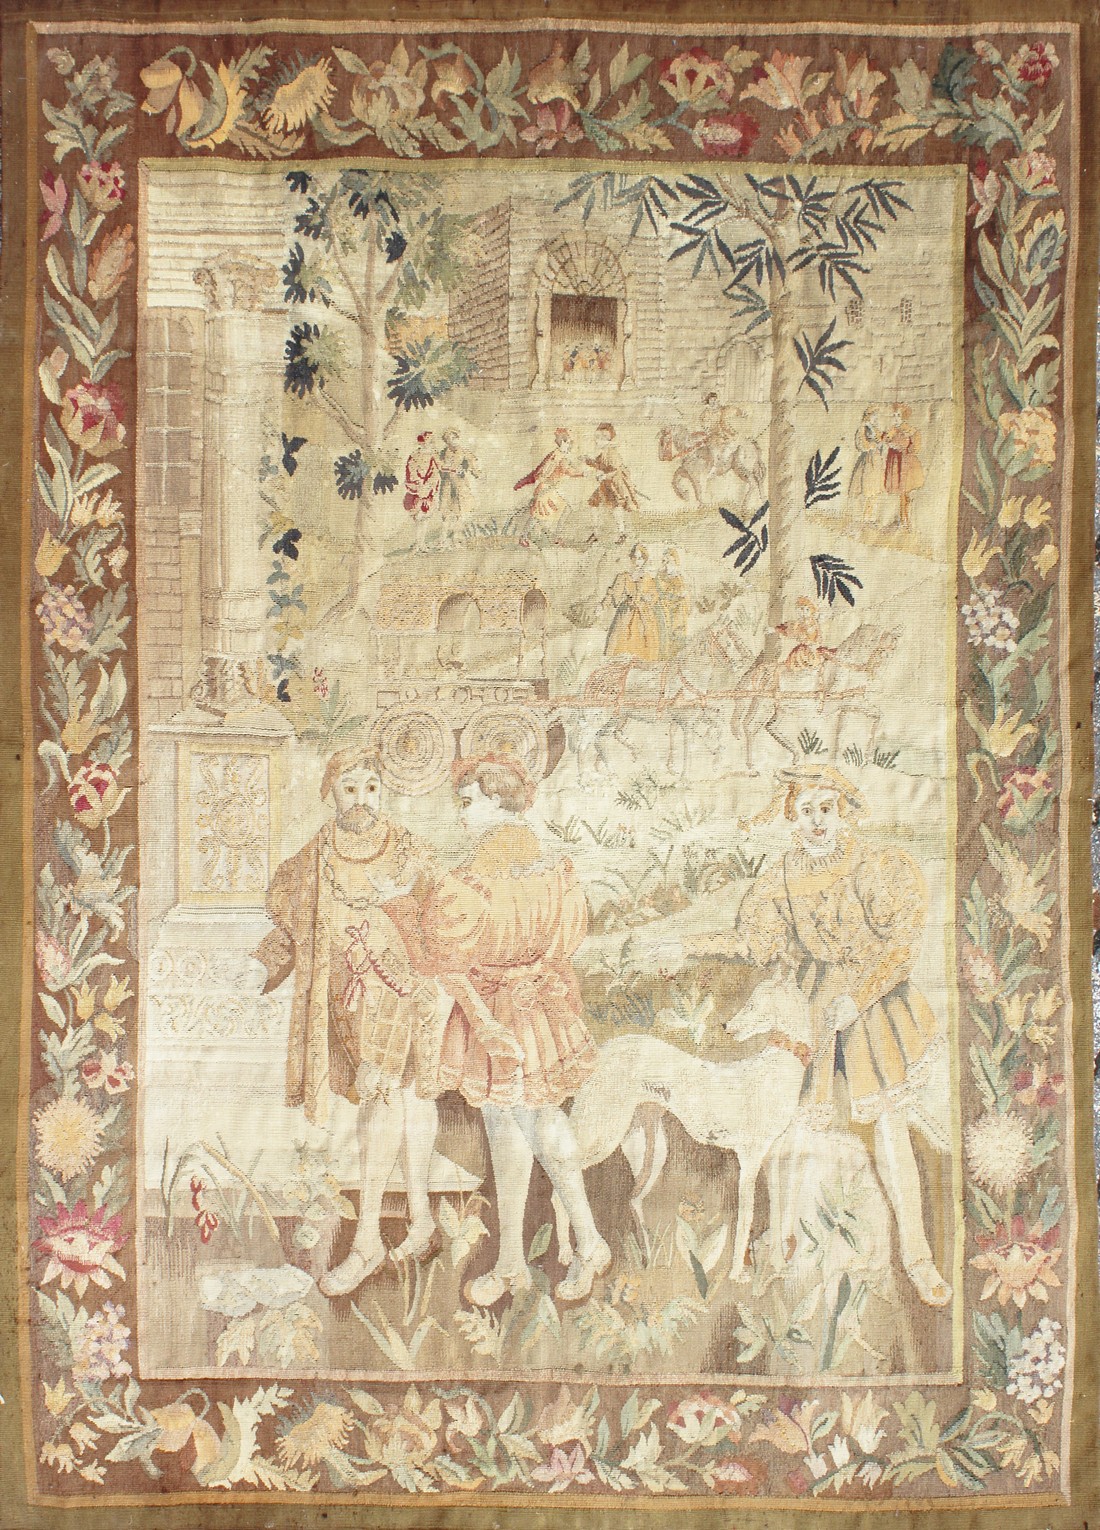 A GOOD 18TH CENTURY FRENCH TAPESTRY decorated with many figures within a floral border. 6ft high x